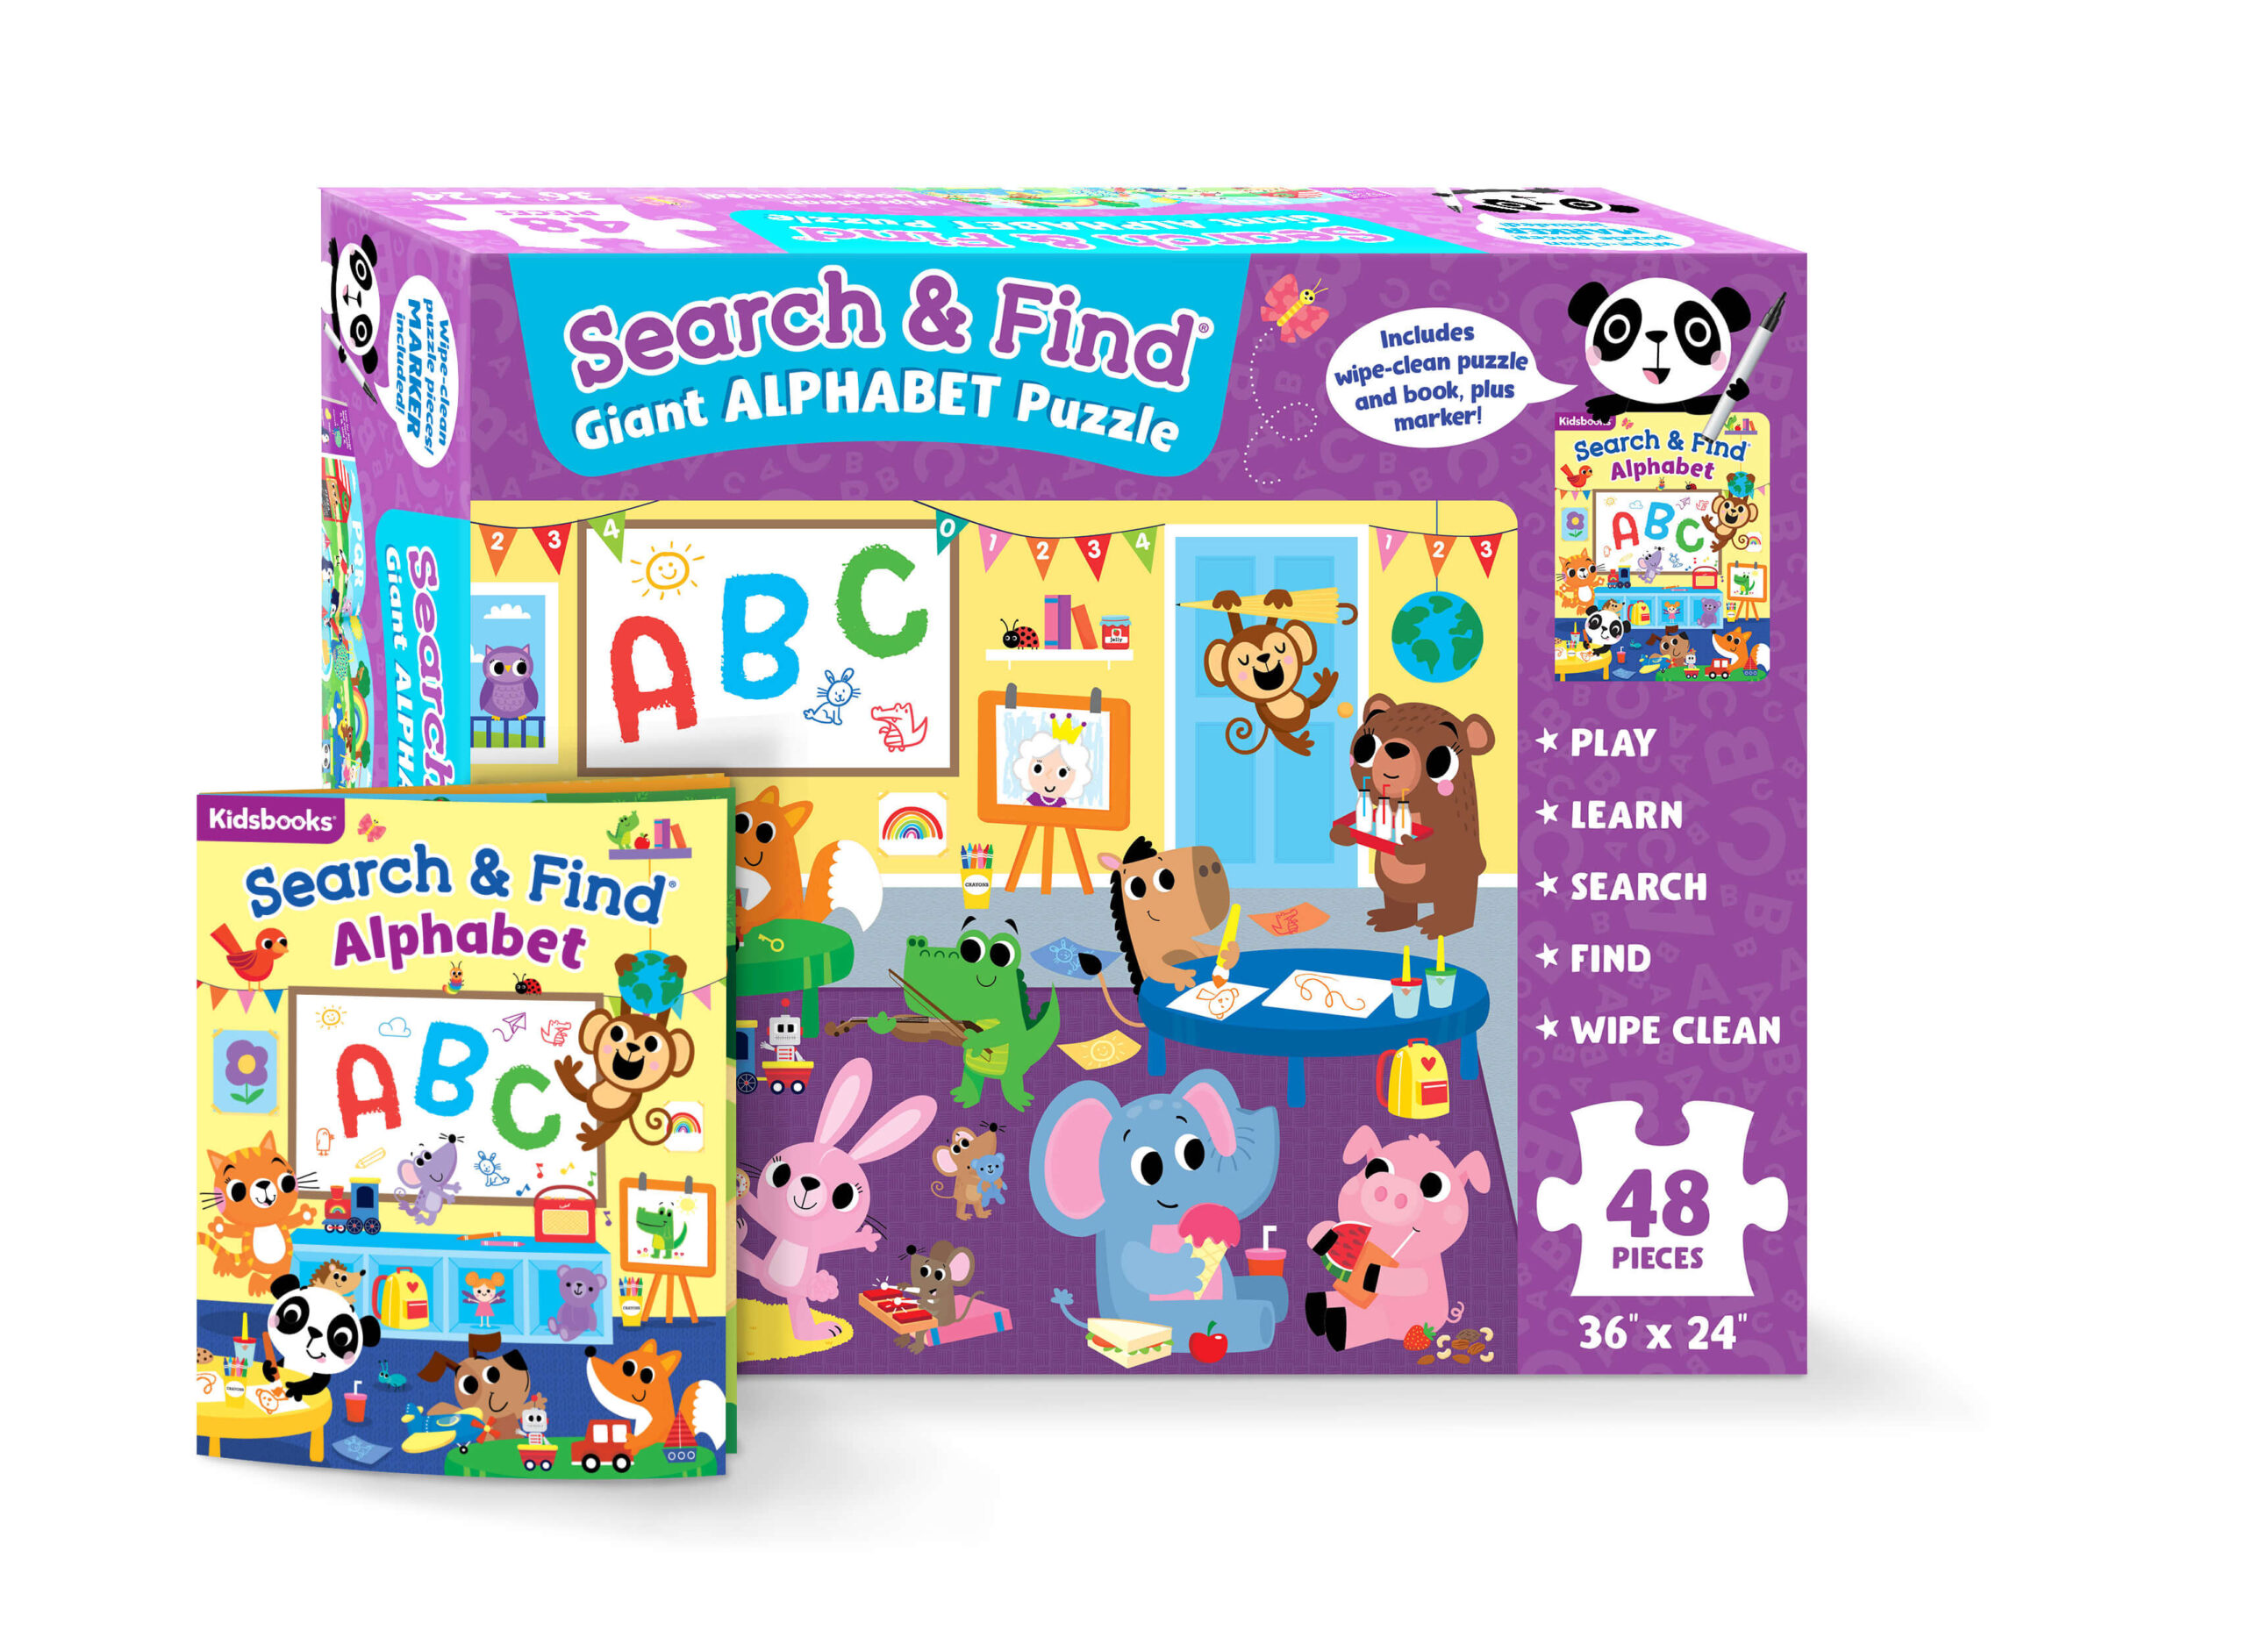 Search & Find Giant Alphabet Puzzle and Book Set